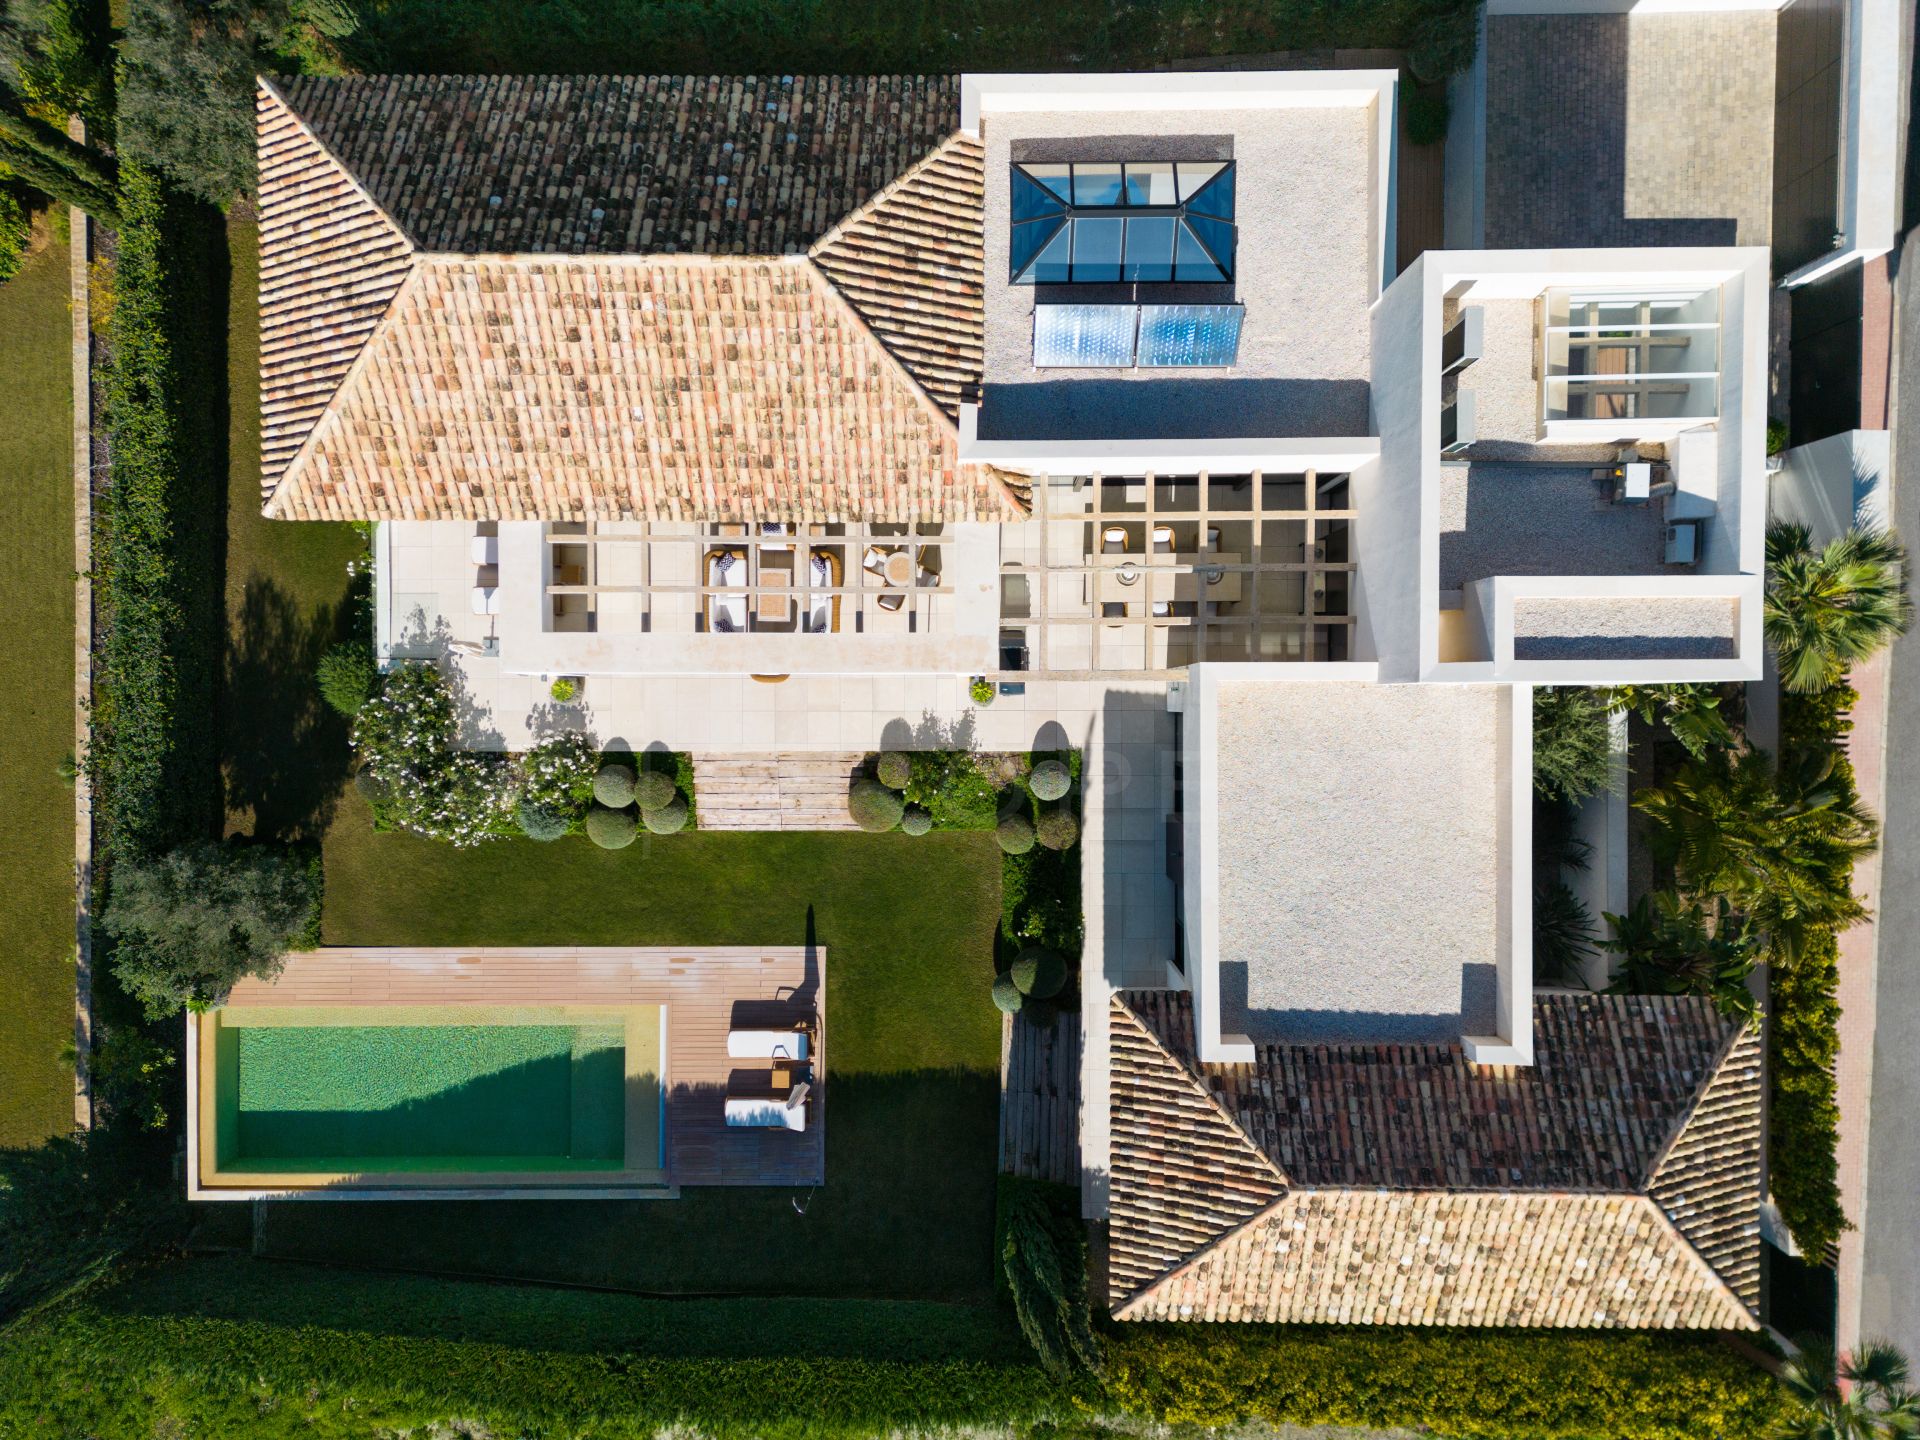 Luxury villa with panoramic views in the Golf Valley